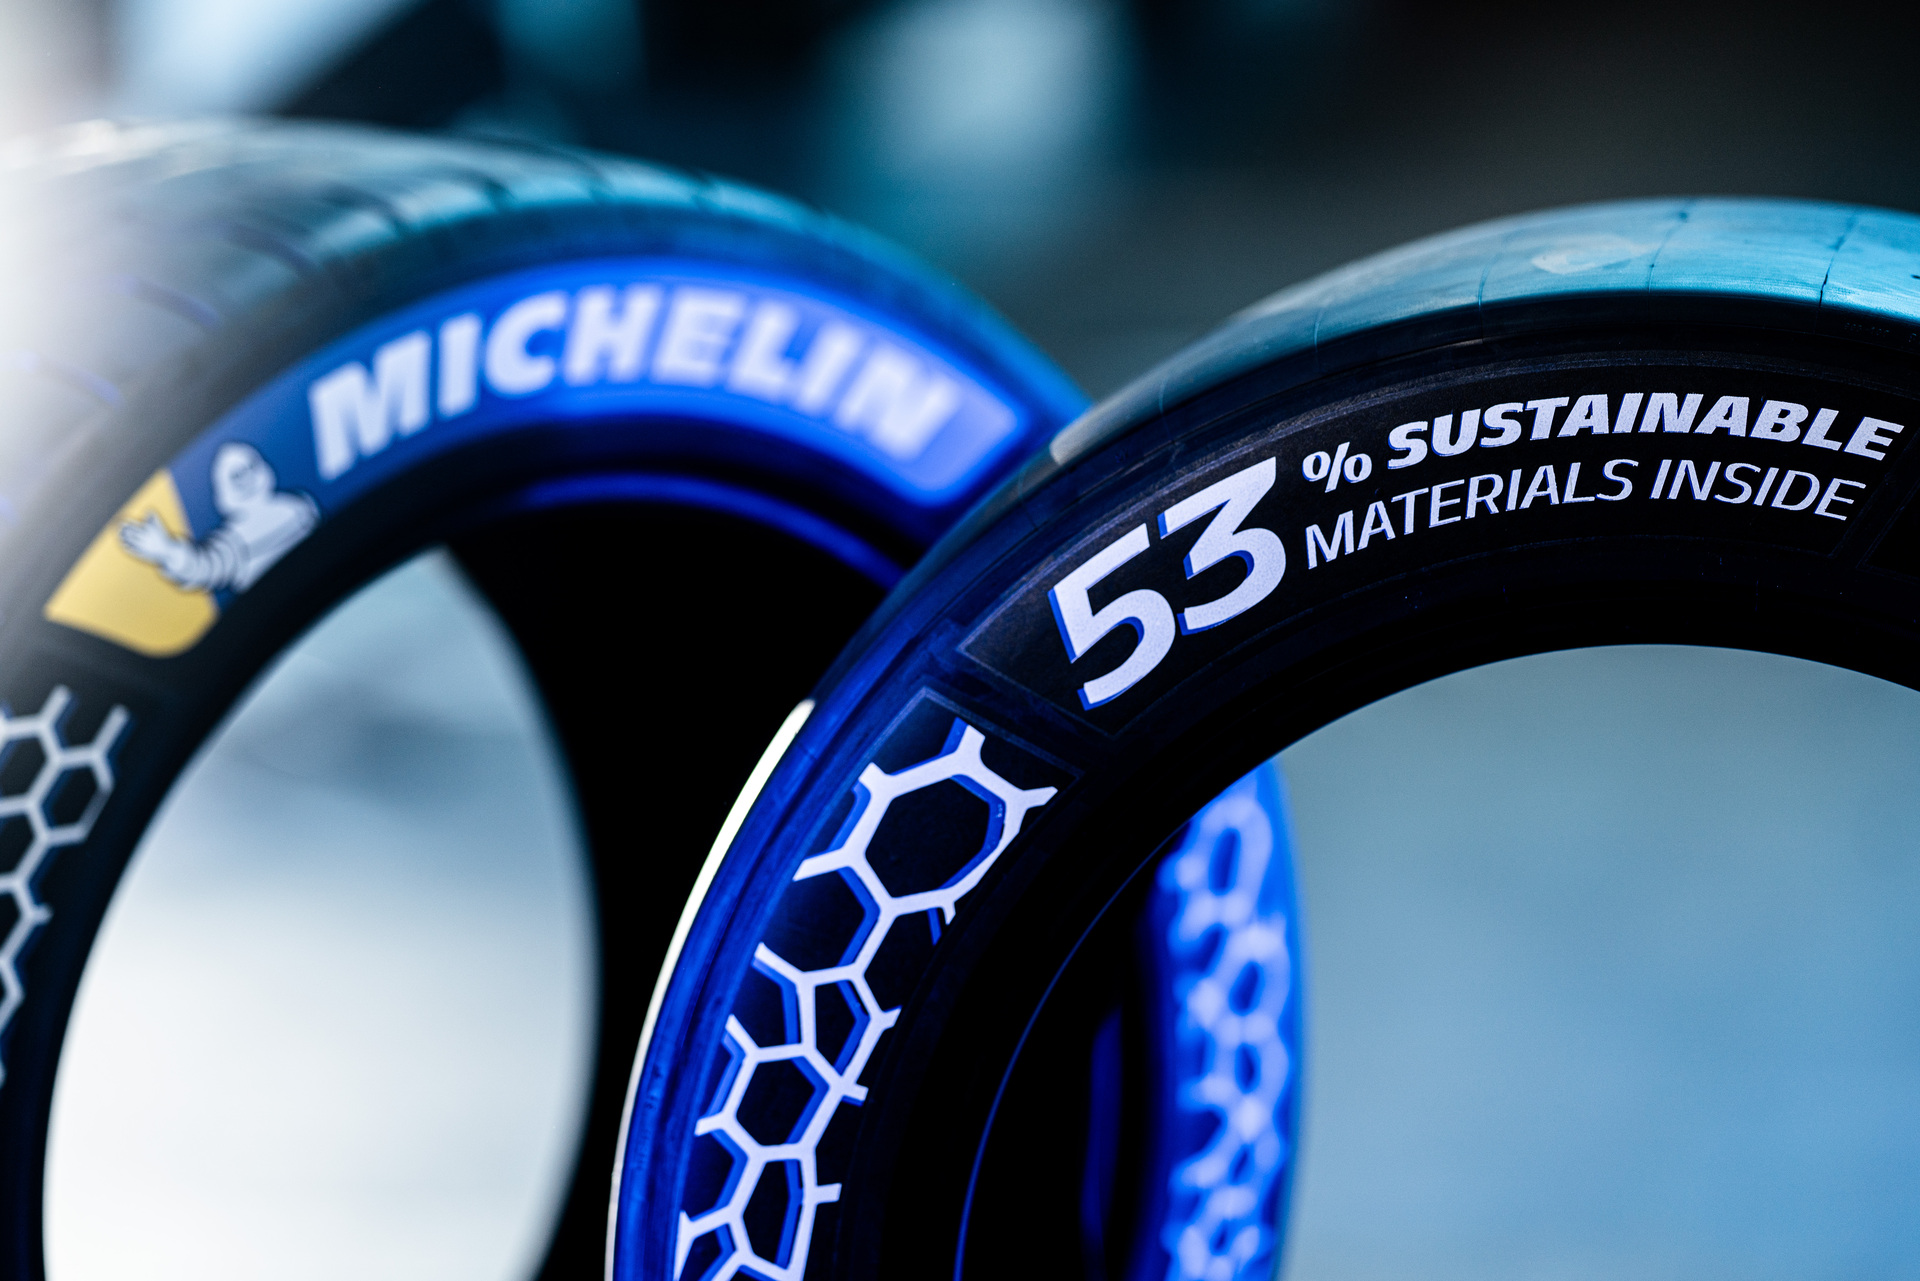 Goodwood Festival Of Speed: Porsche And Michelin Collaborate on Tyres That Consist of 53% Sustainable Materials.